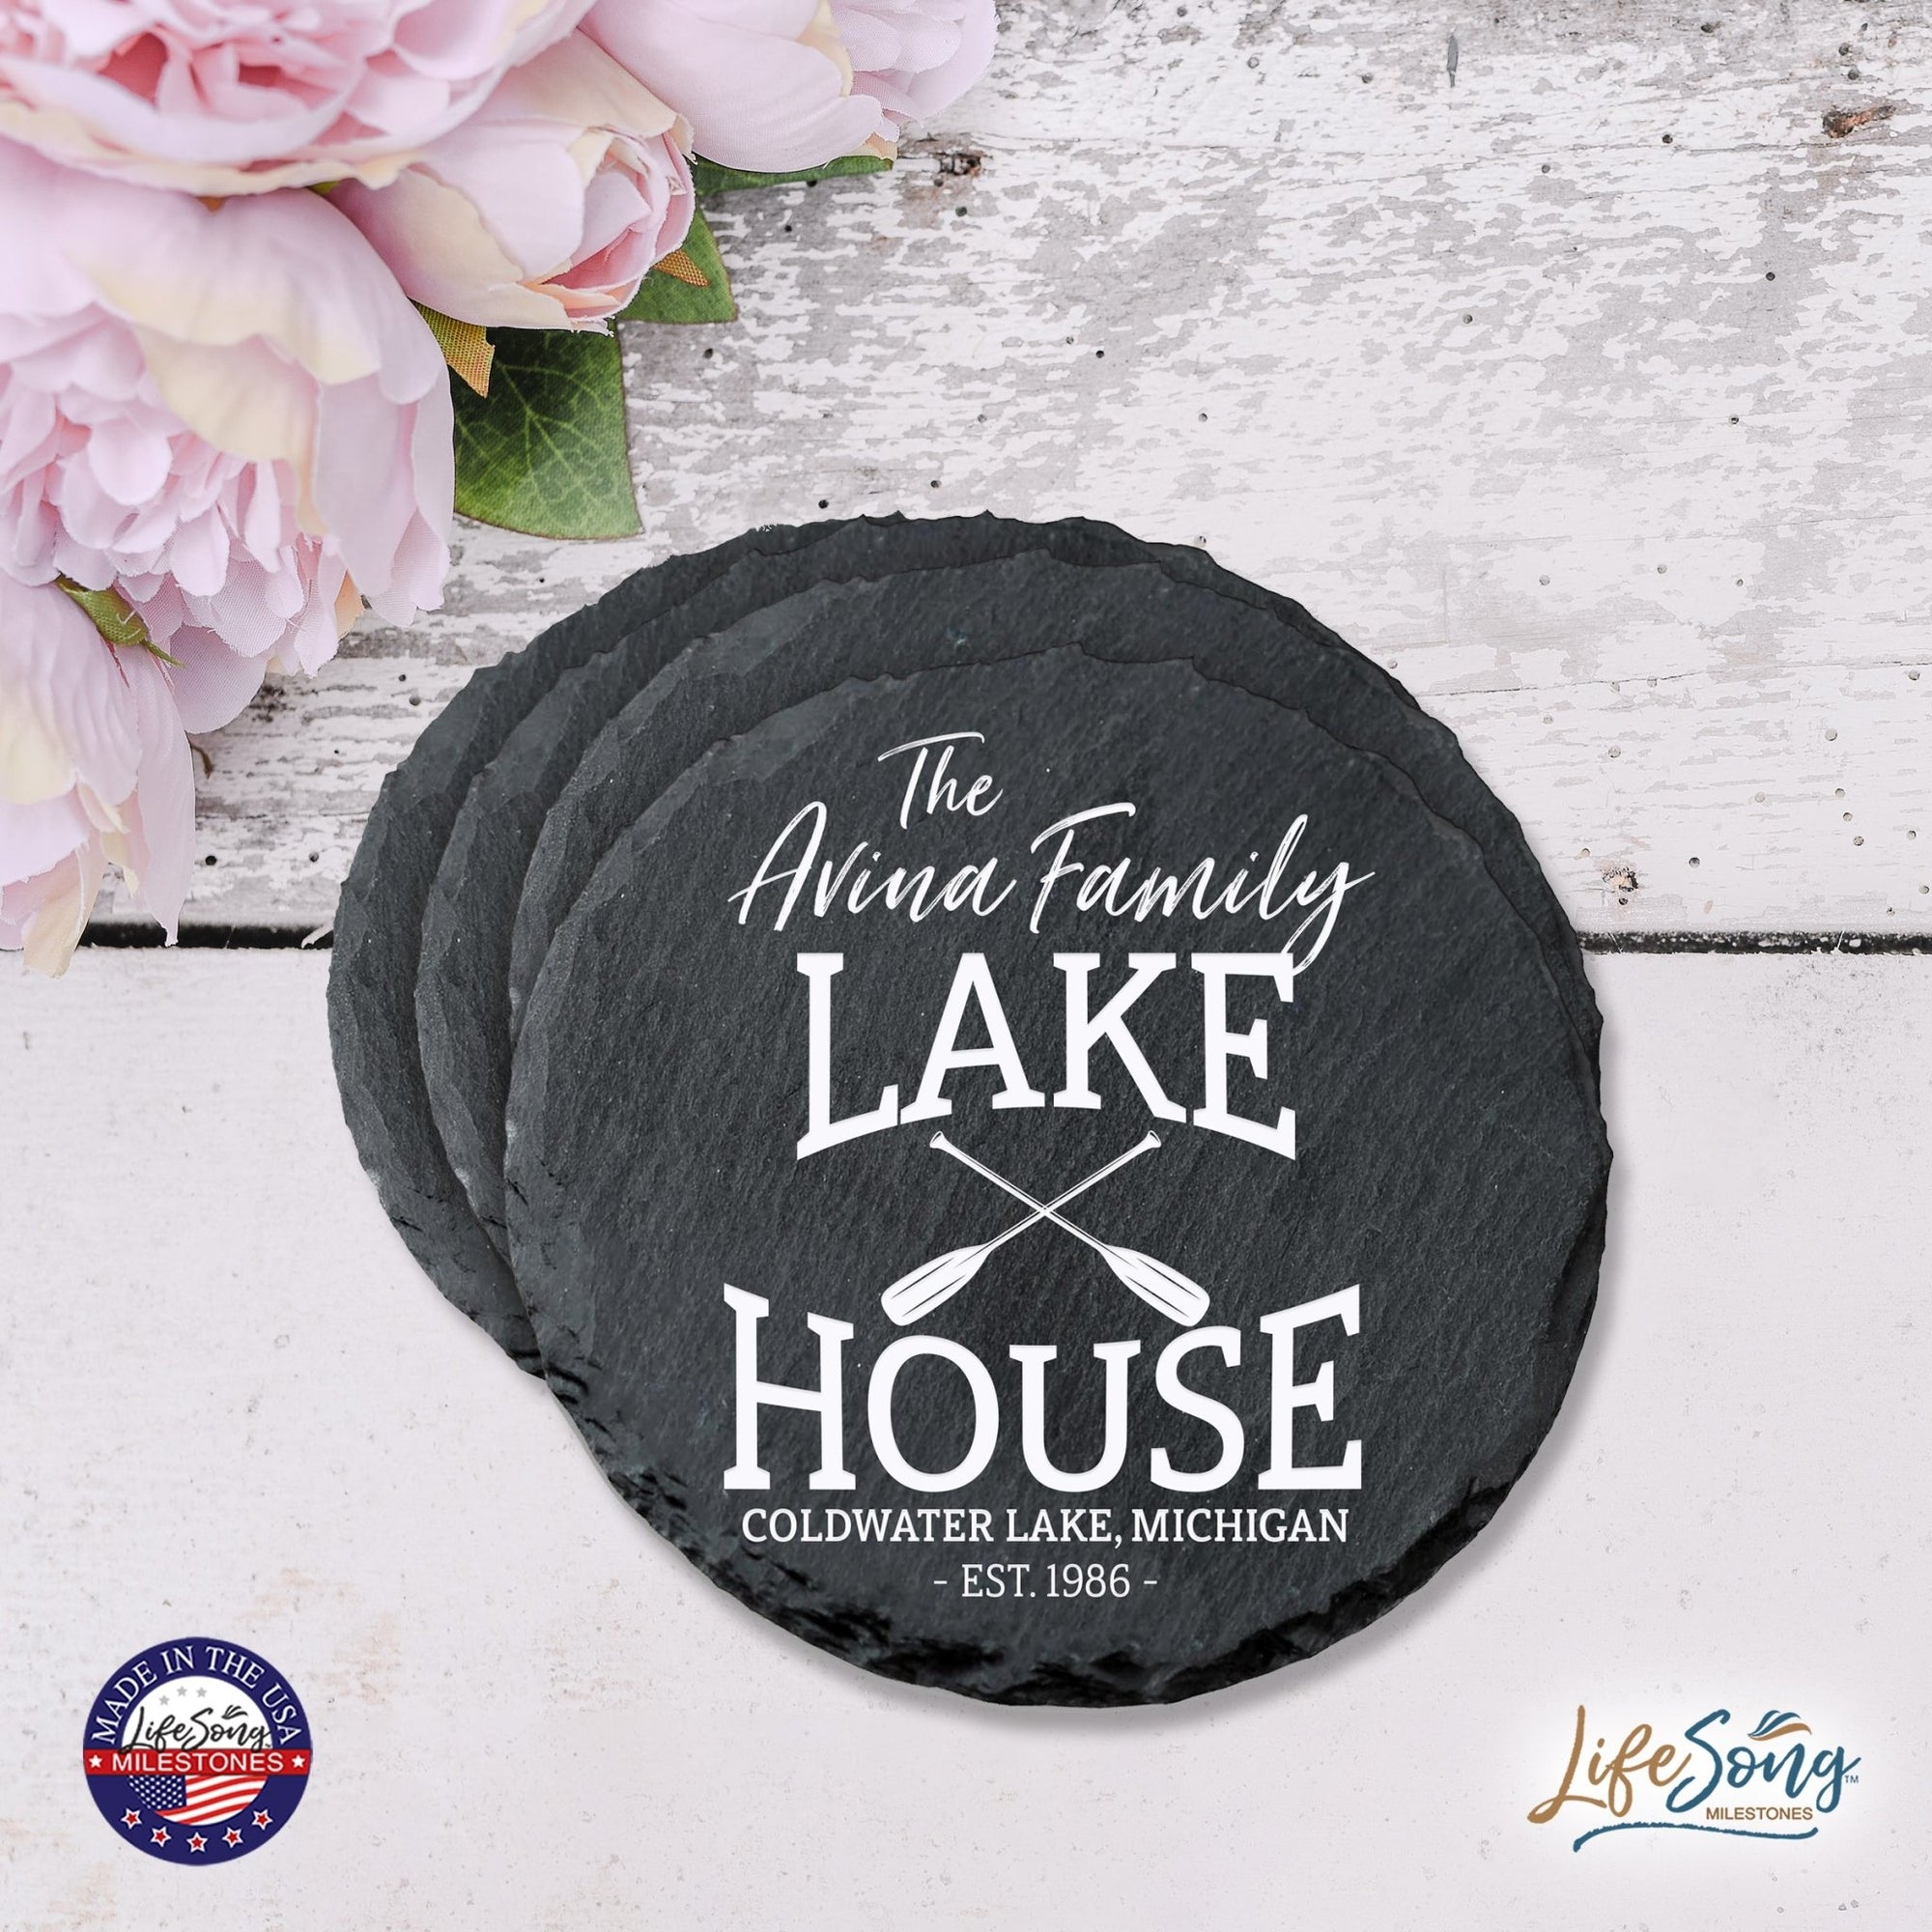 Custom 6pc Coaster Set Kitchen and Tabletop Decorations 4x4 Gift Lake House (Paddles) - LifeSong Milestones